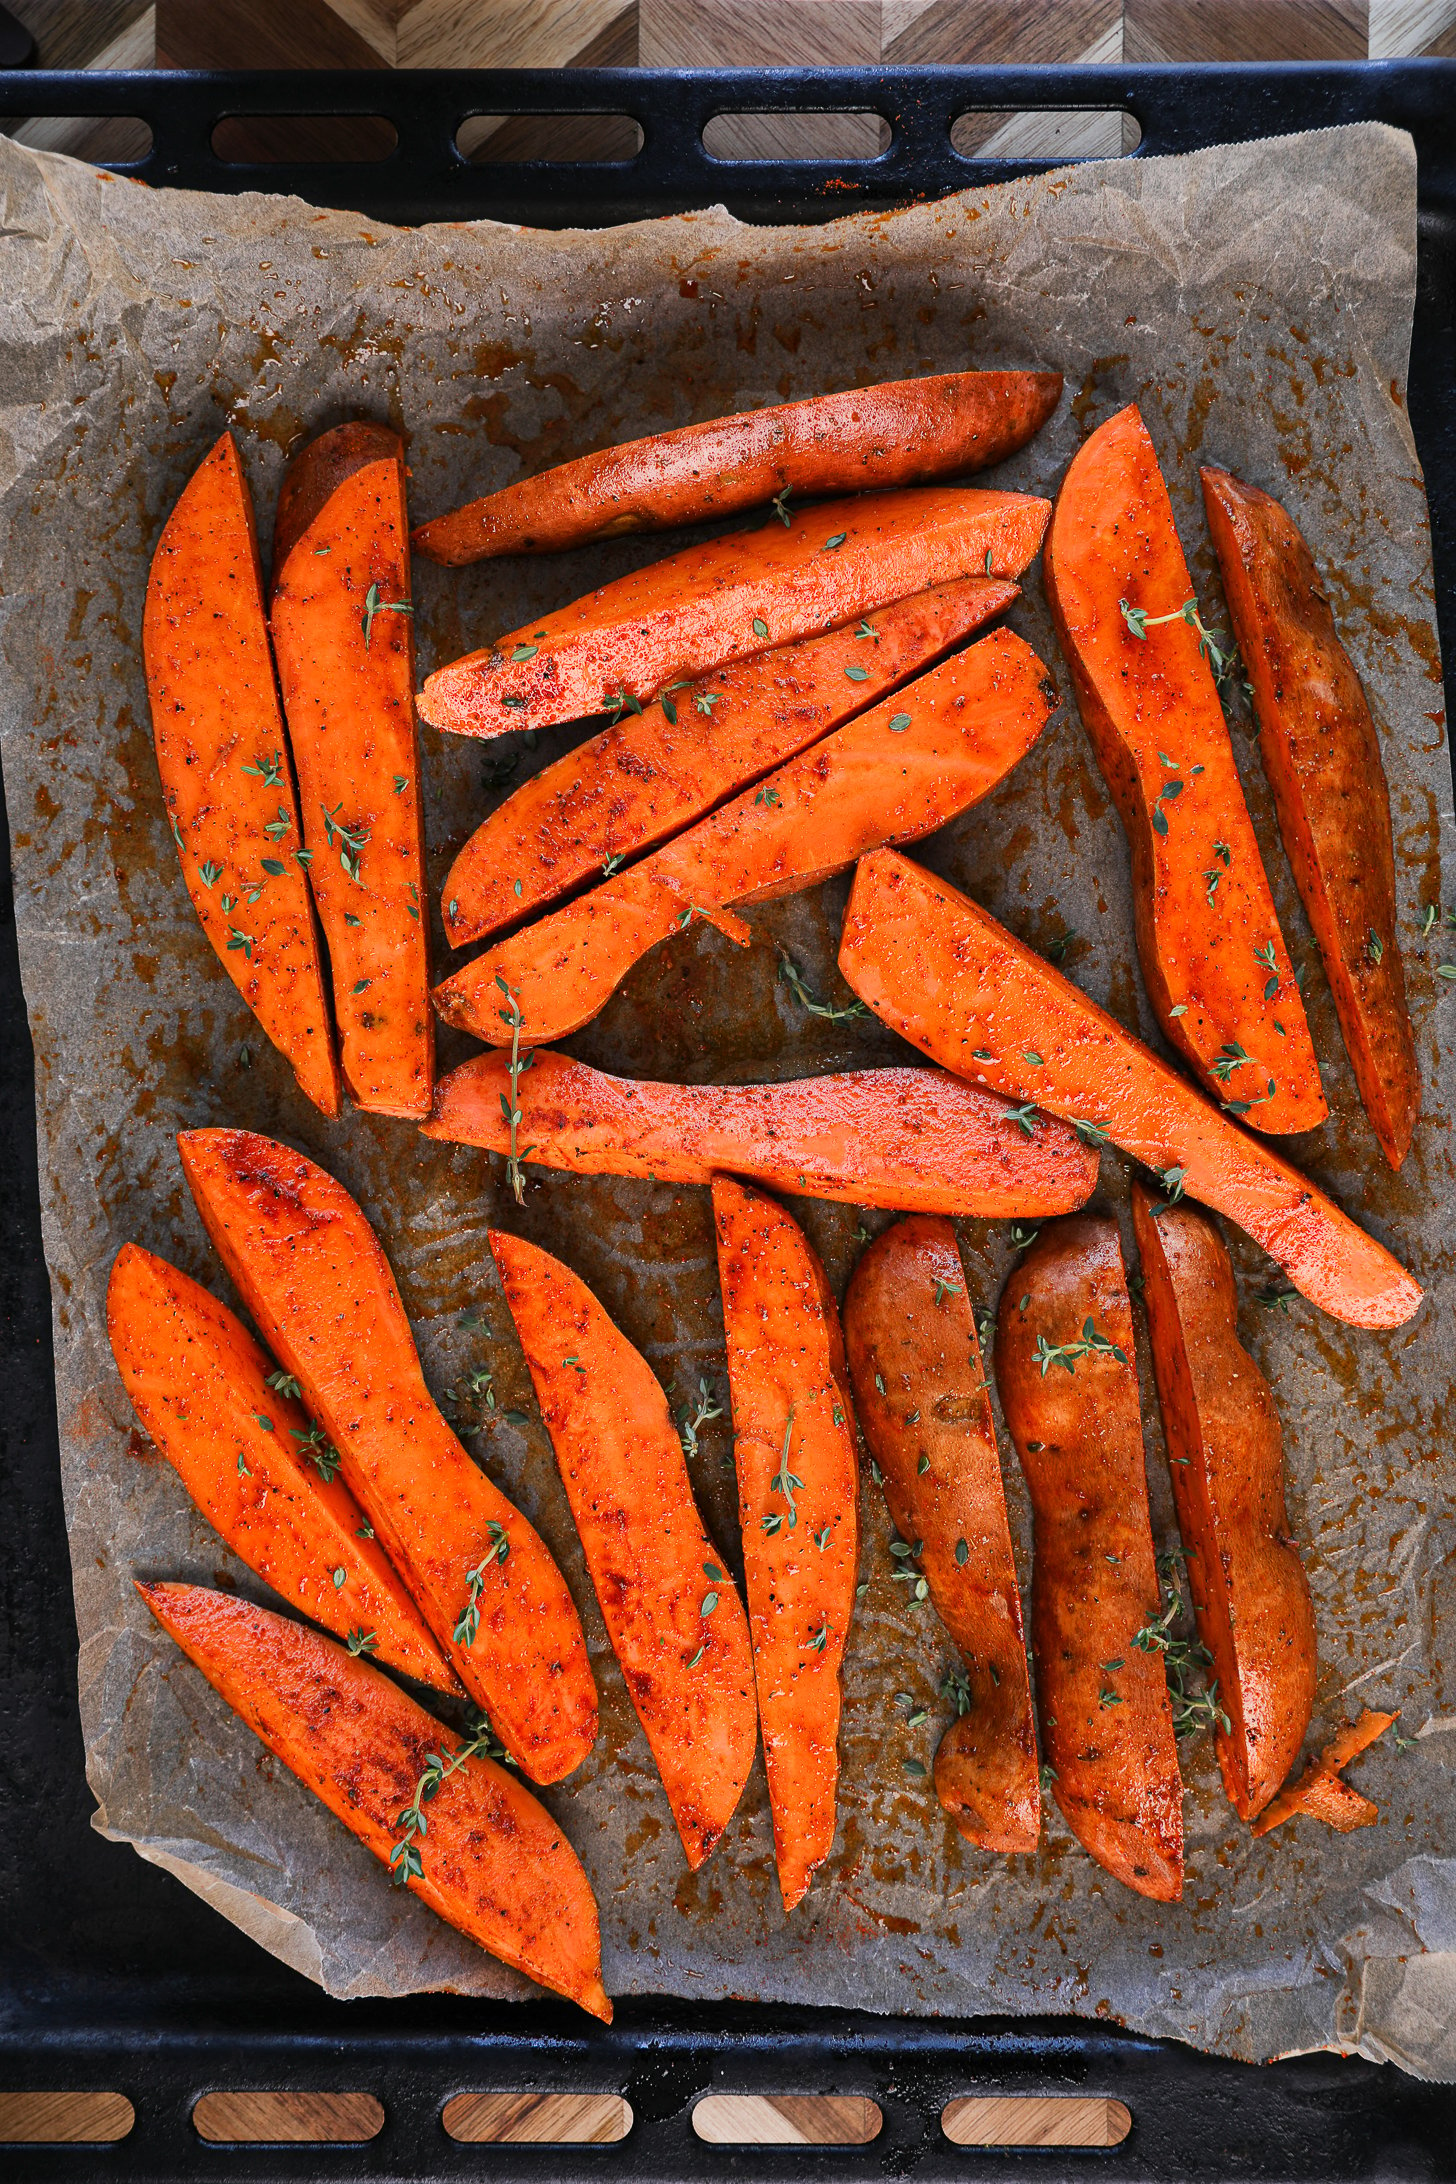 Raw sweet potato wedges, seasoned and drizzled with oil, adorned with fresh thyme leaves, resting on a lined baking sheet.